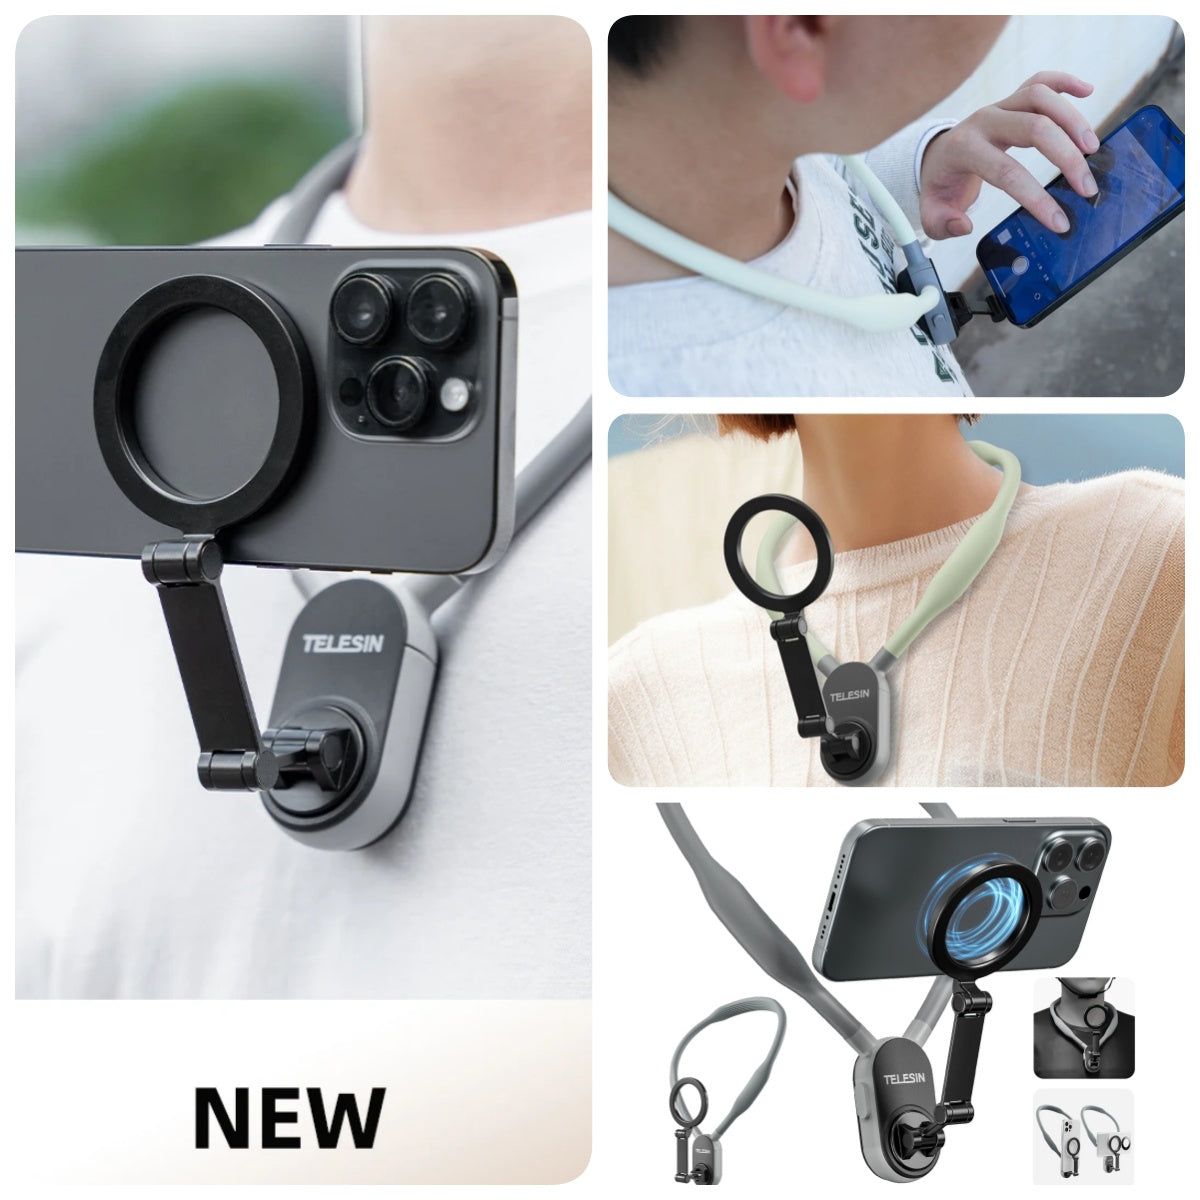 Silicone Phone Magnetic Neck Mount Quick Release Hold For Phone Magsafe Magnetic Suction Cell Phone Neck Hanging Bracket